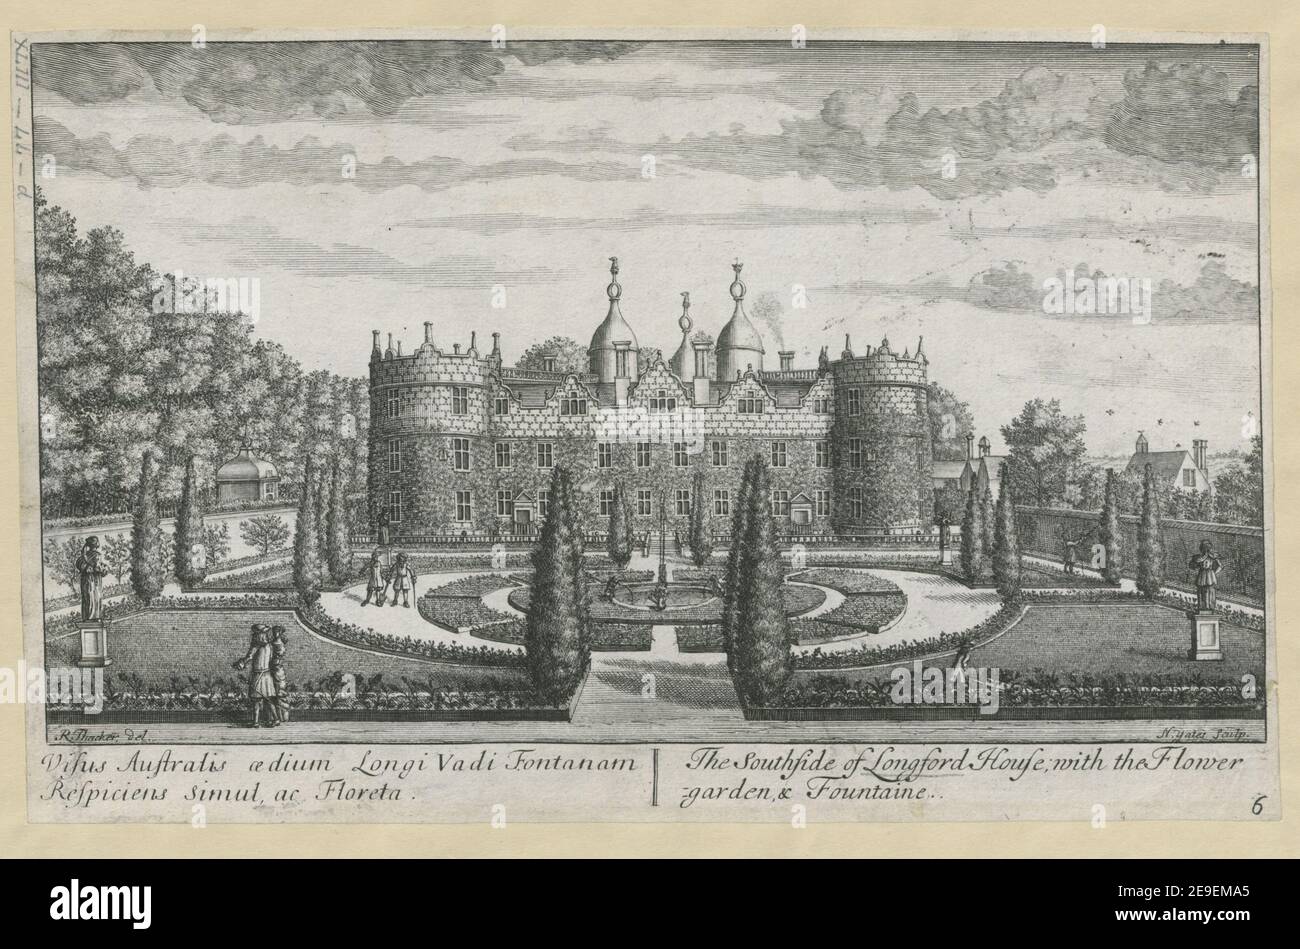 Visus Australis oedium Longi Vadi Fontanam Respiciens Simul ac Floreta. = The Southside of Longford House with the Flower garden & Fountaine.  Author  Yeates, Nicholas 43.44.d. Place of publication: [England] Publisher: [publisher not identified] Date of publication: [about 1680]  Item type: 1 print Medium: etching and engraving Dimensions: sheet 19.4 x 30.9 cm.  Former owner: George III, King of Great Britain, 1738-1820 Stock Photo